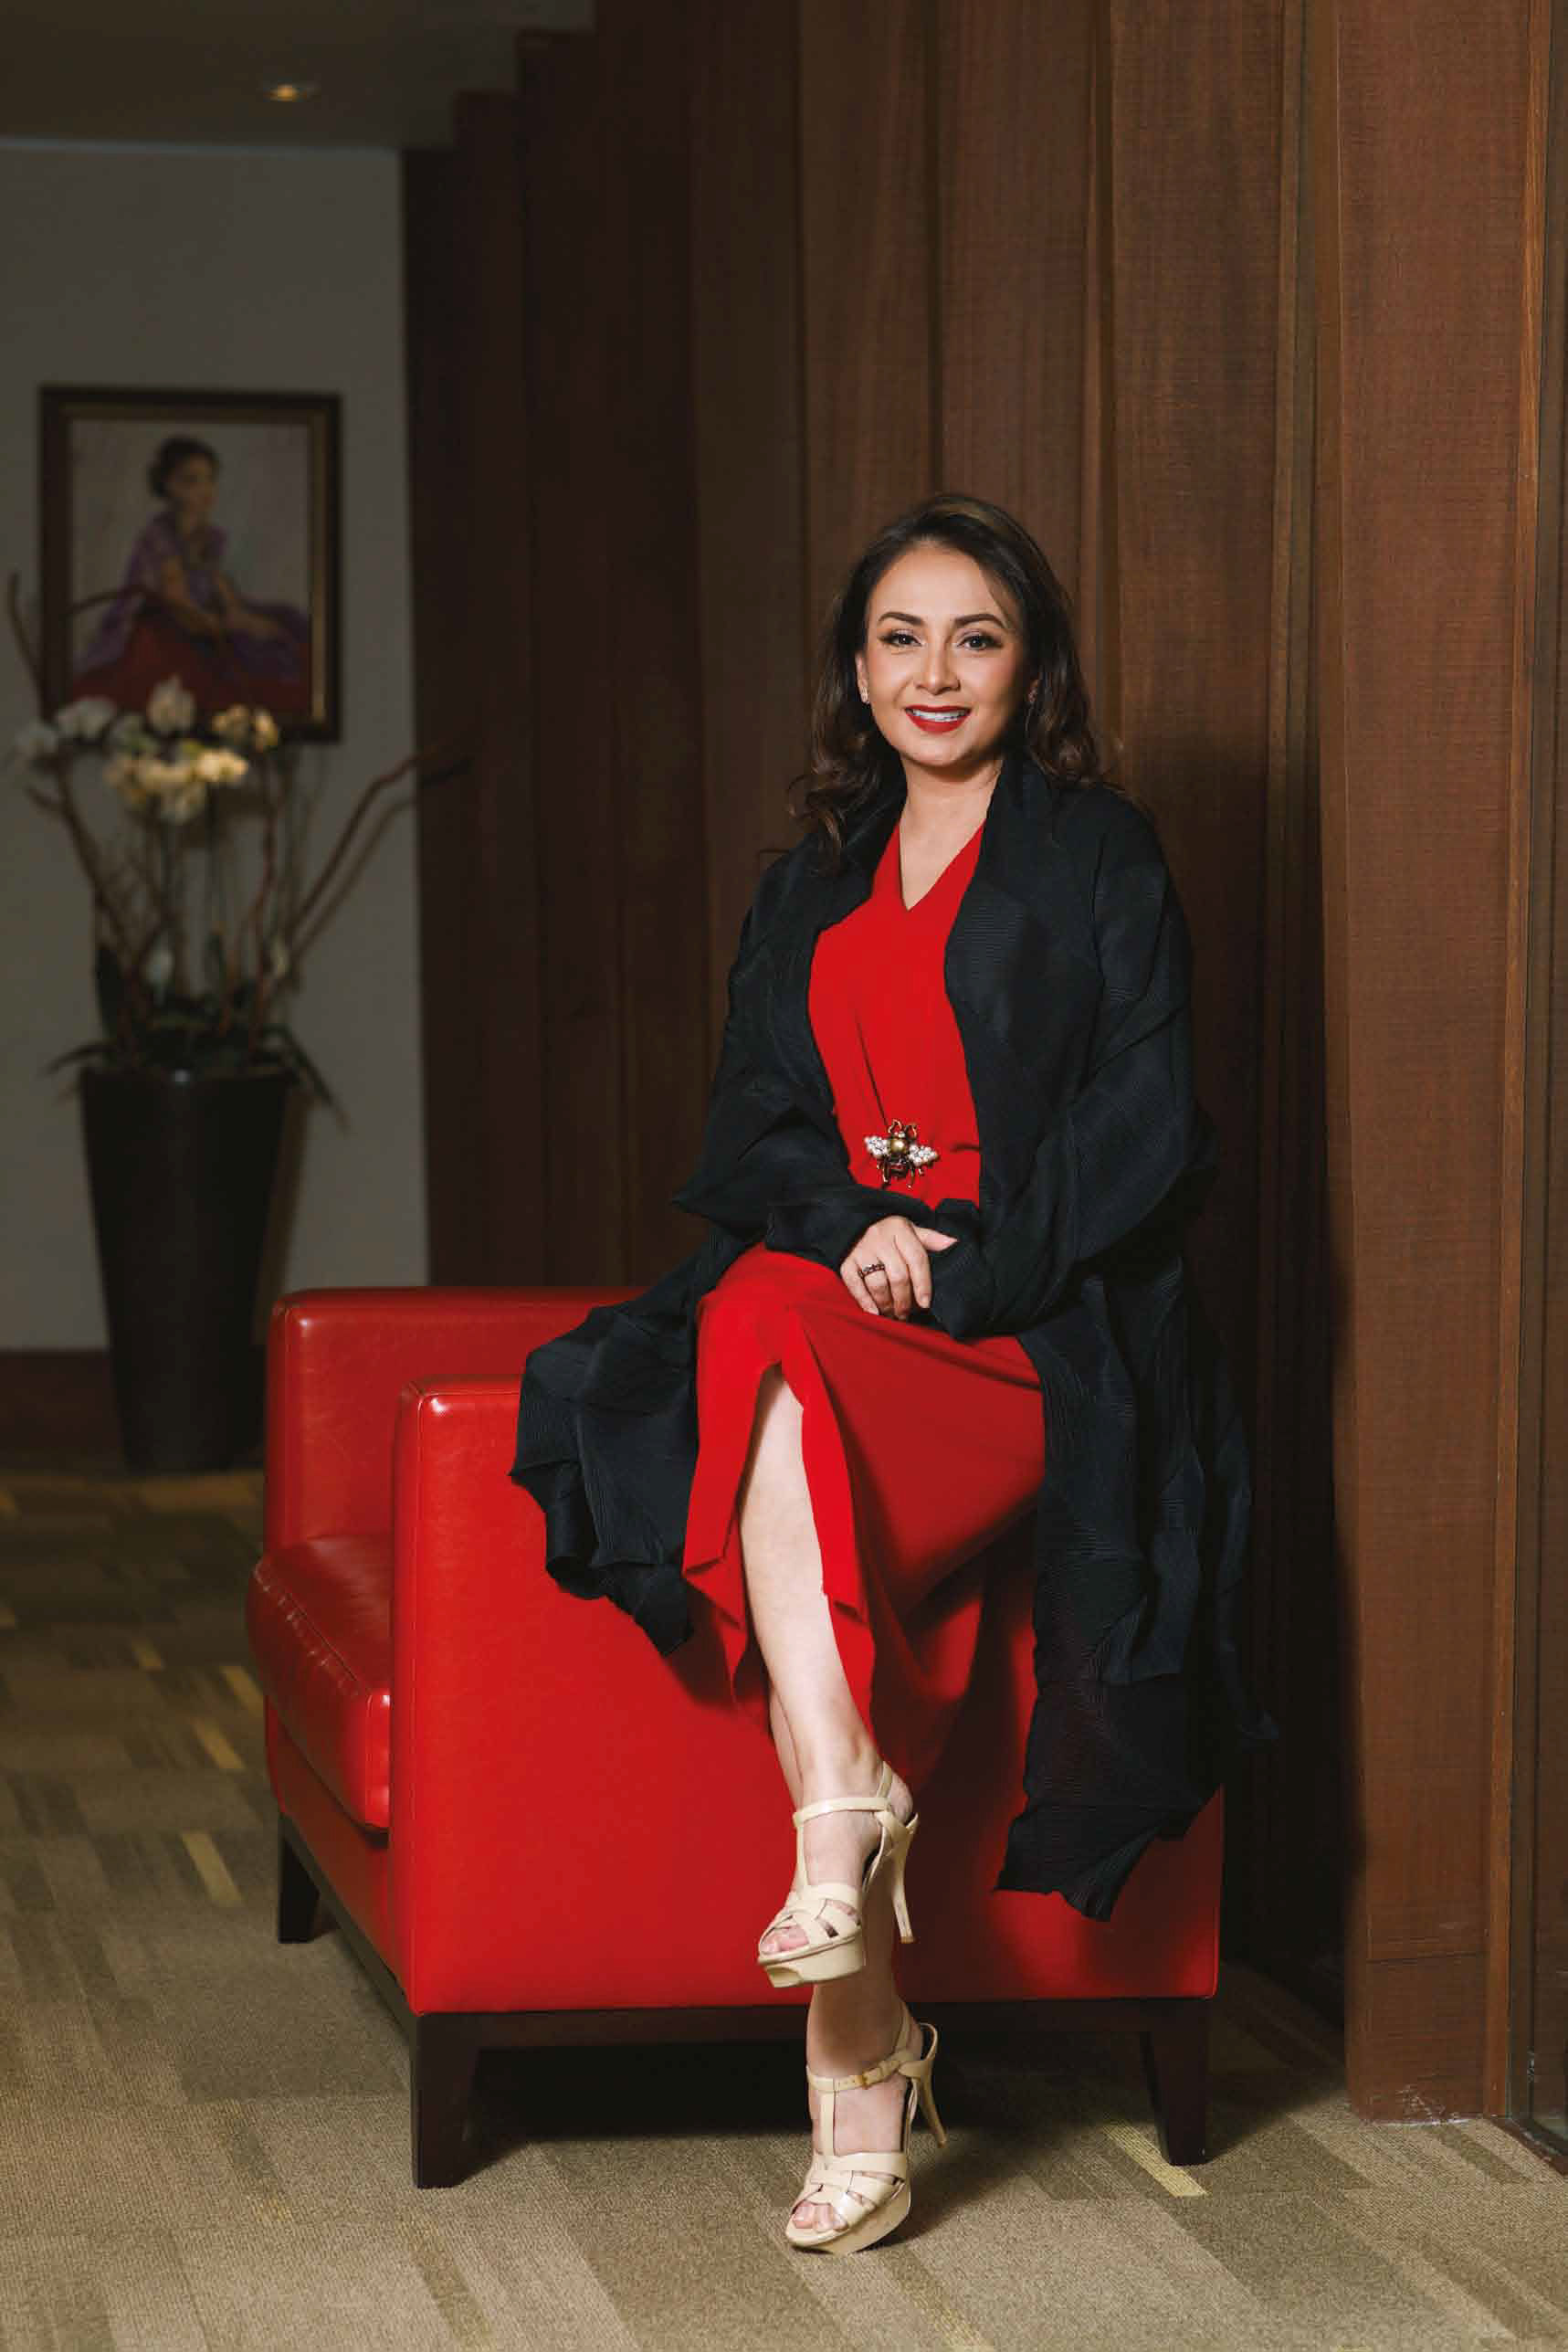 Founder of Syailendra Asia Salina Nordin Wants to Attract “Real Money” Rather than “Hot Money” to Asia